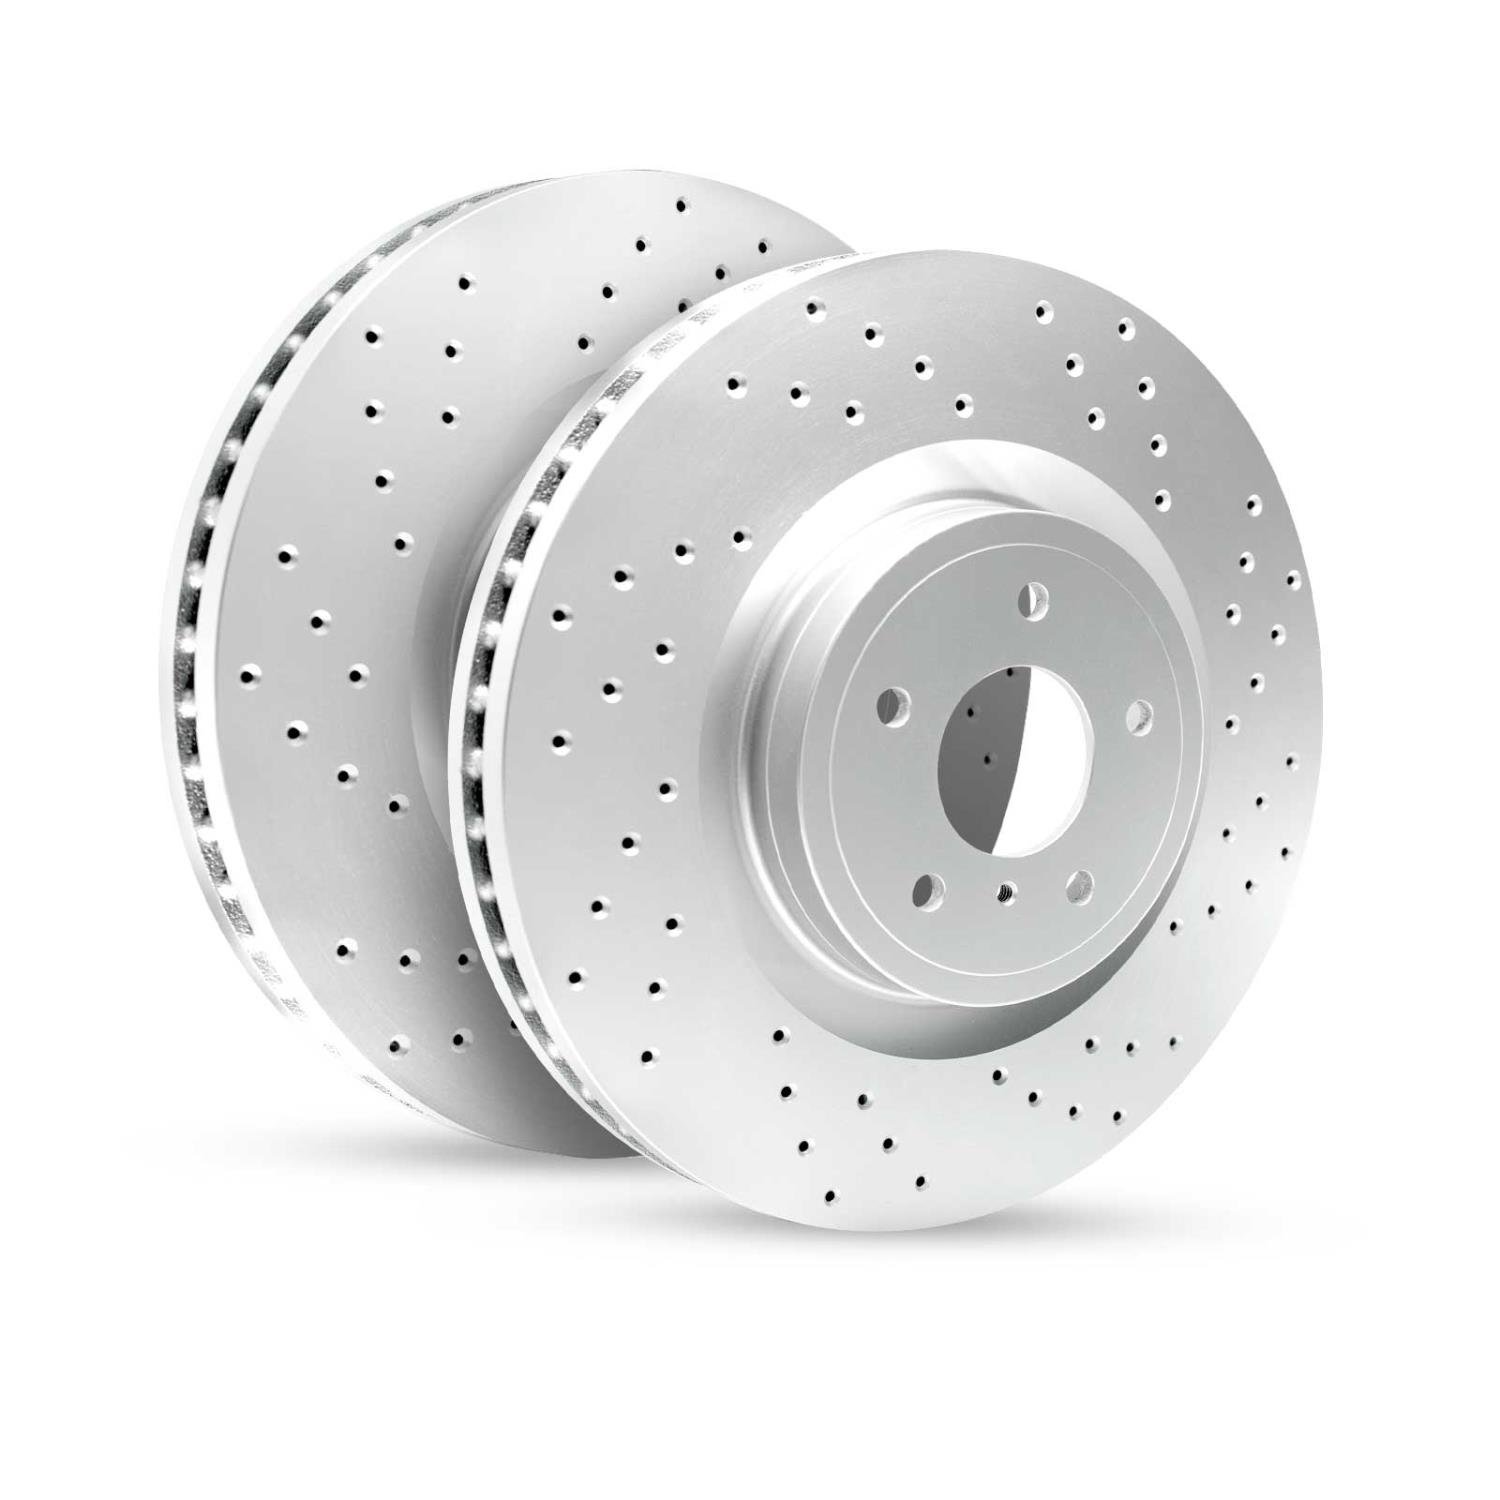 GEO-Carbon Drilled/Slotted Rotors, 1961-1991 Mercedes-Benz,